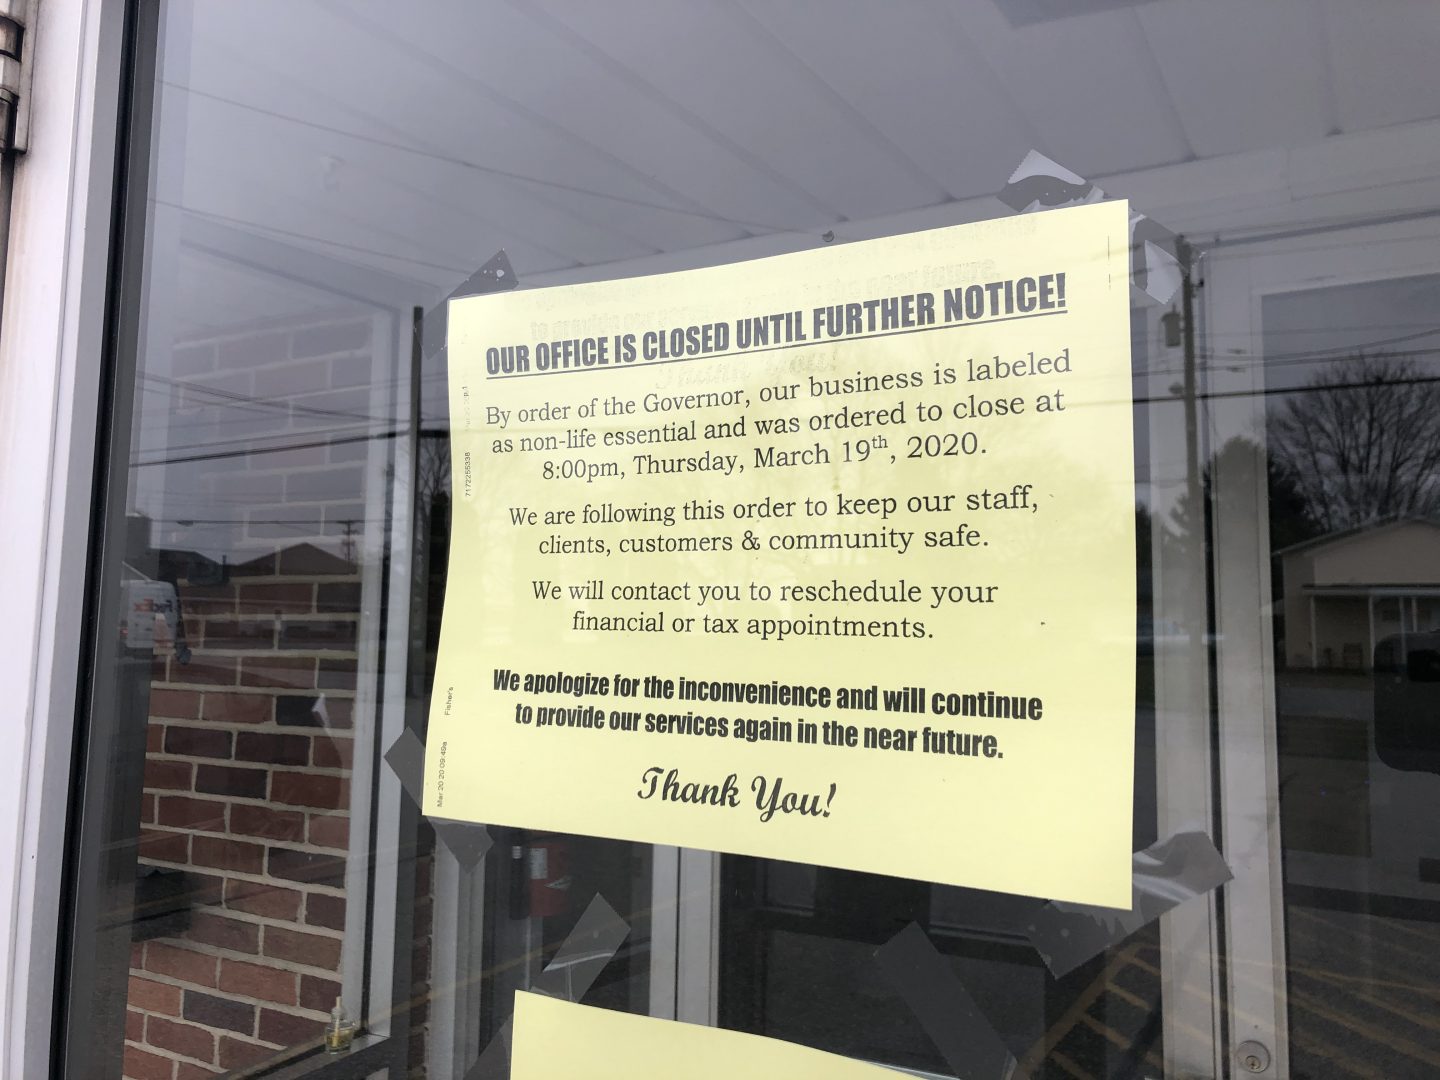 Many businesses across Pennsylvania were  closed on March 23, 2020, in response to an order from Gov. Tom Wolf to shutdown non-life sustaining businesses.